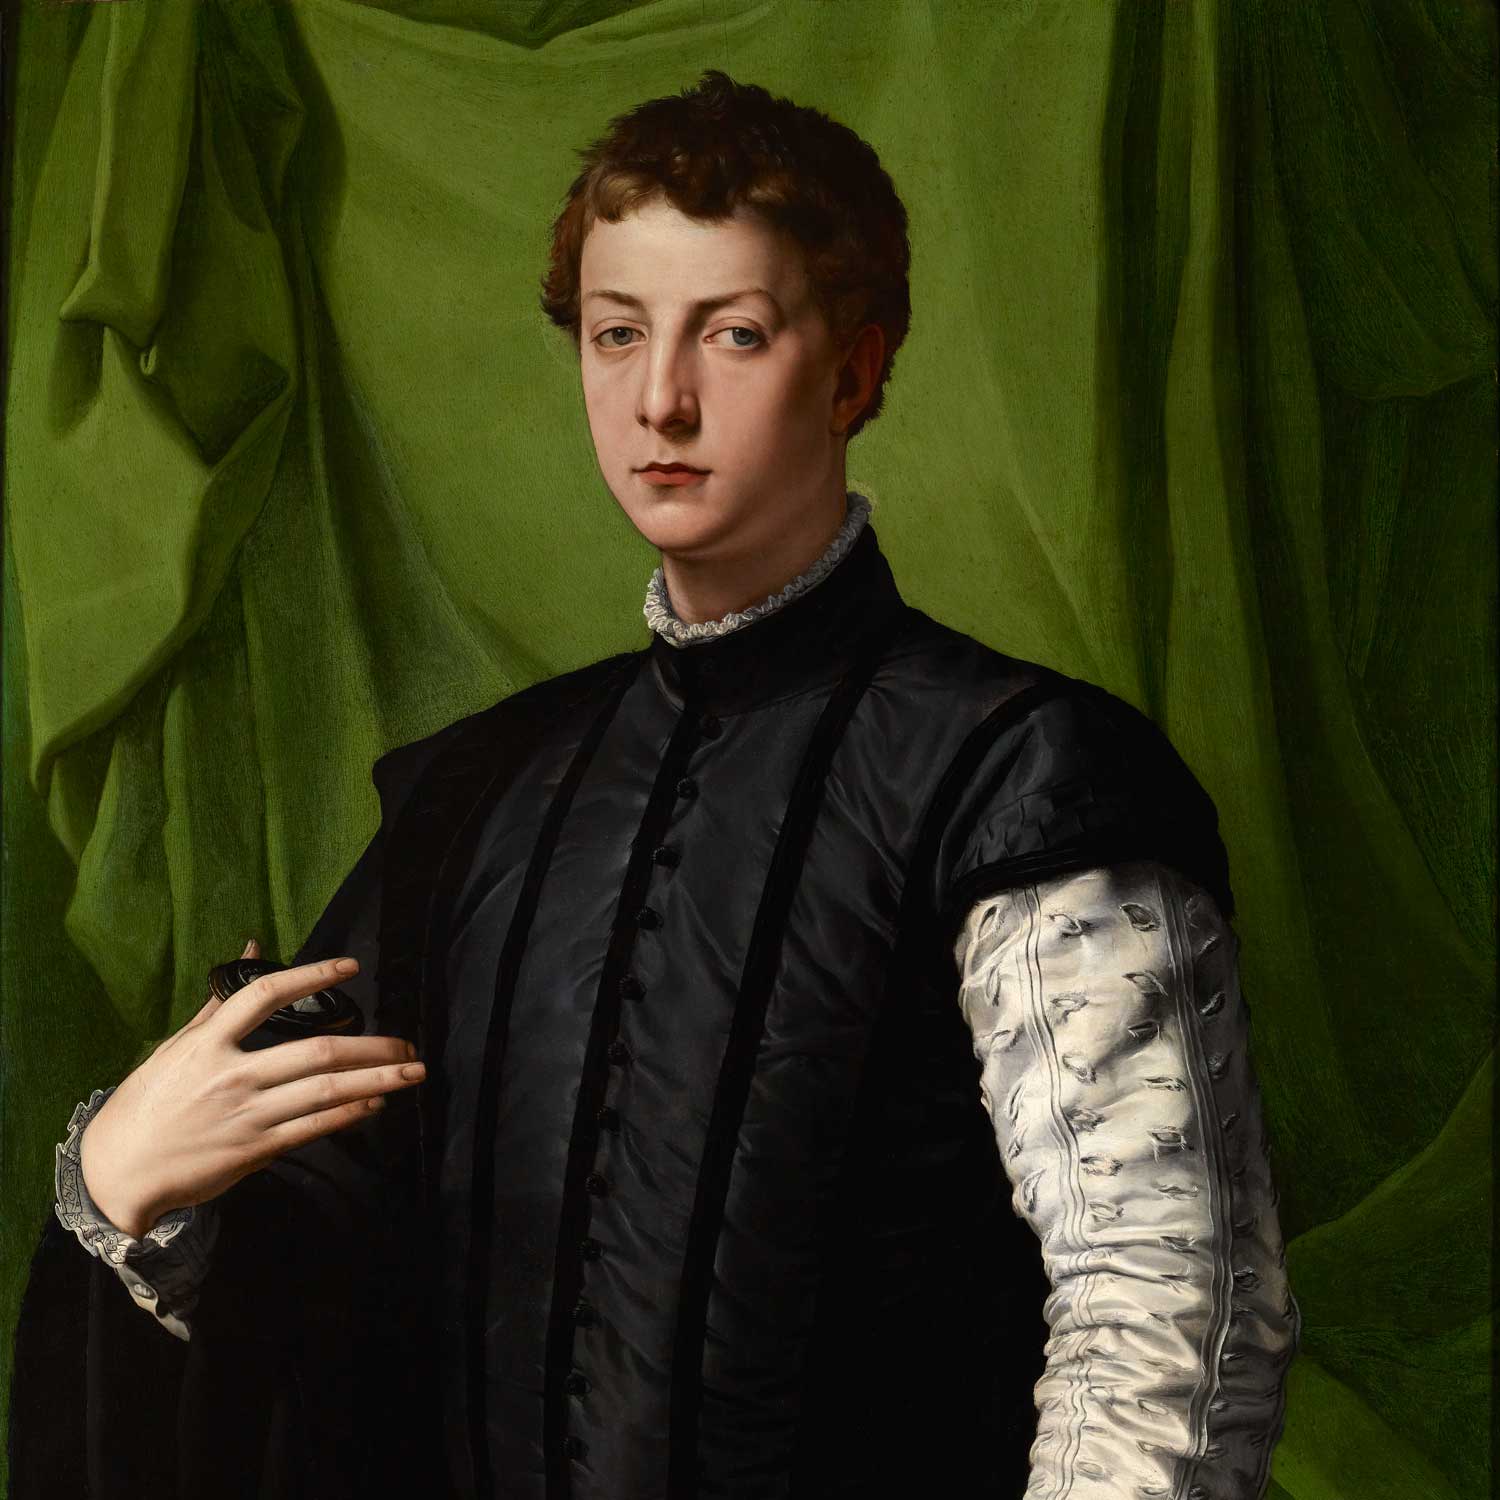 oil painting of a man wearing a black doublet and cloak standing in front of a green curtain